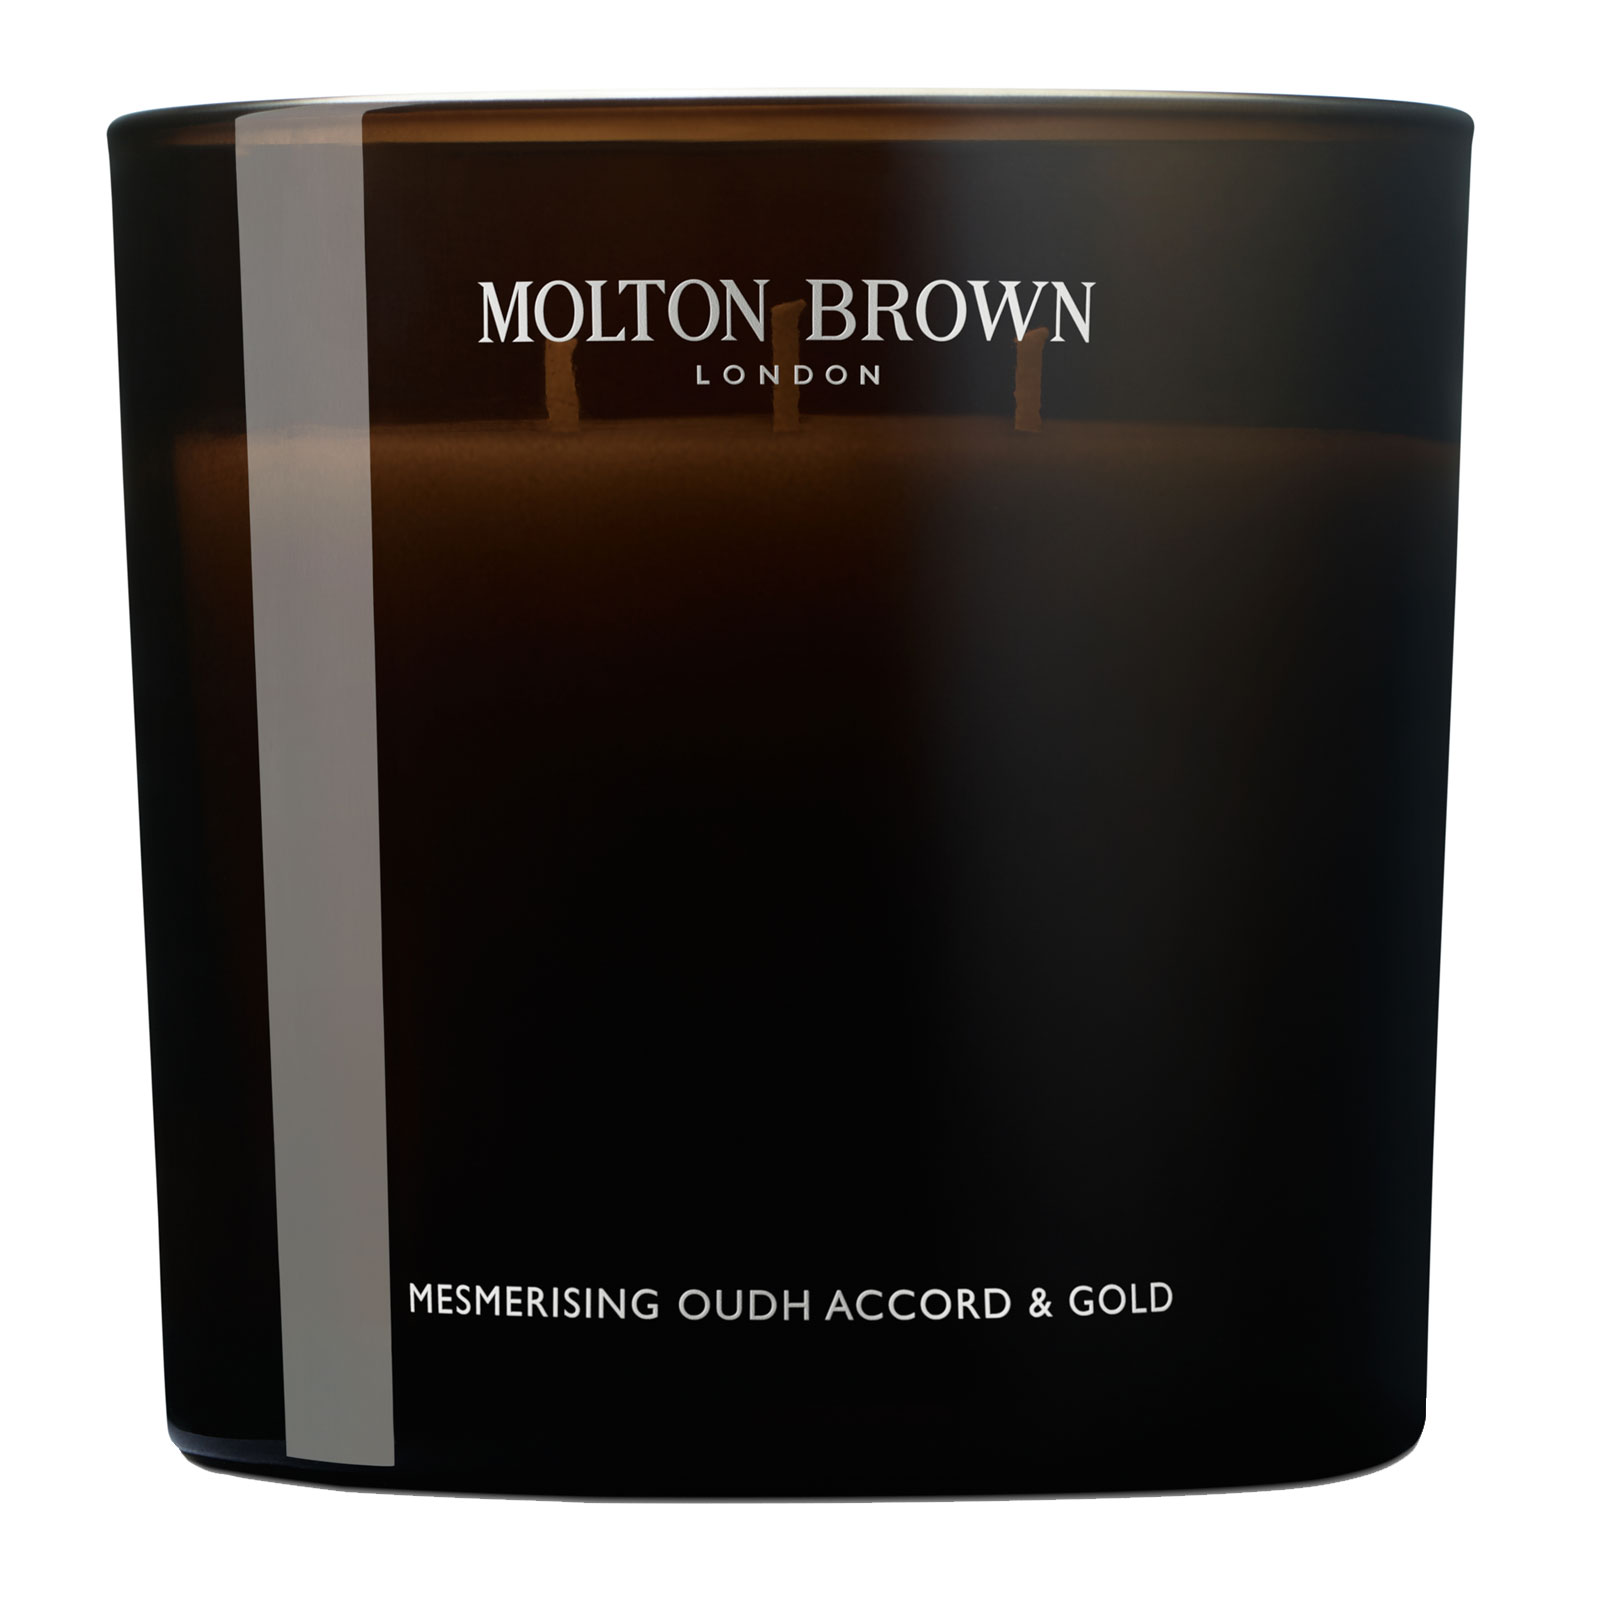 Molton Brown Mesmerising Oudh Accord & Gold Luxury Scented Triple Wick Candle 600G